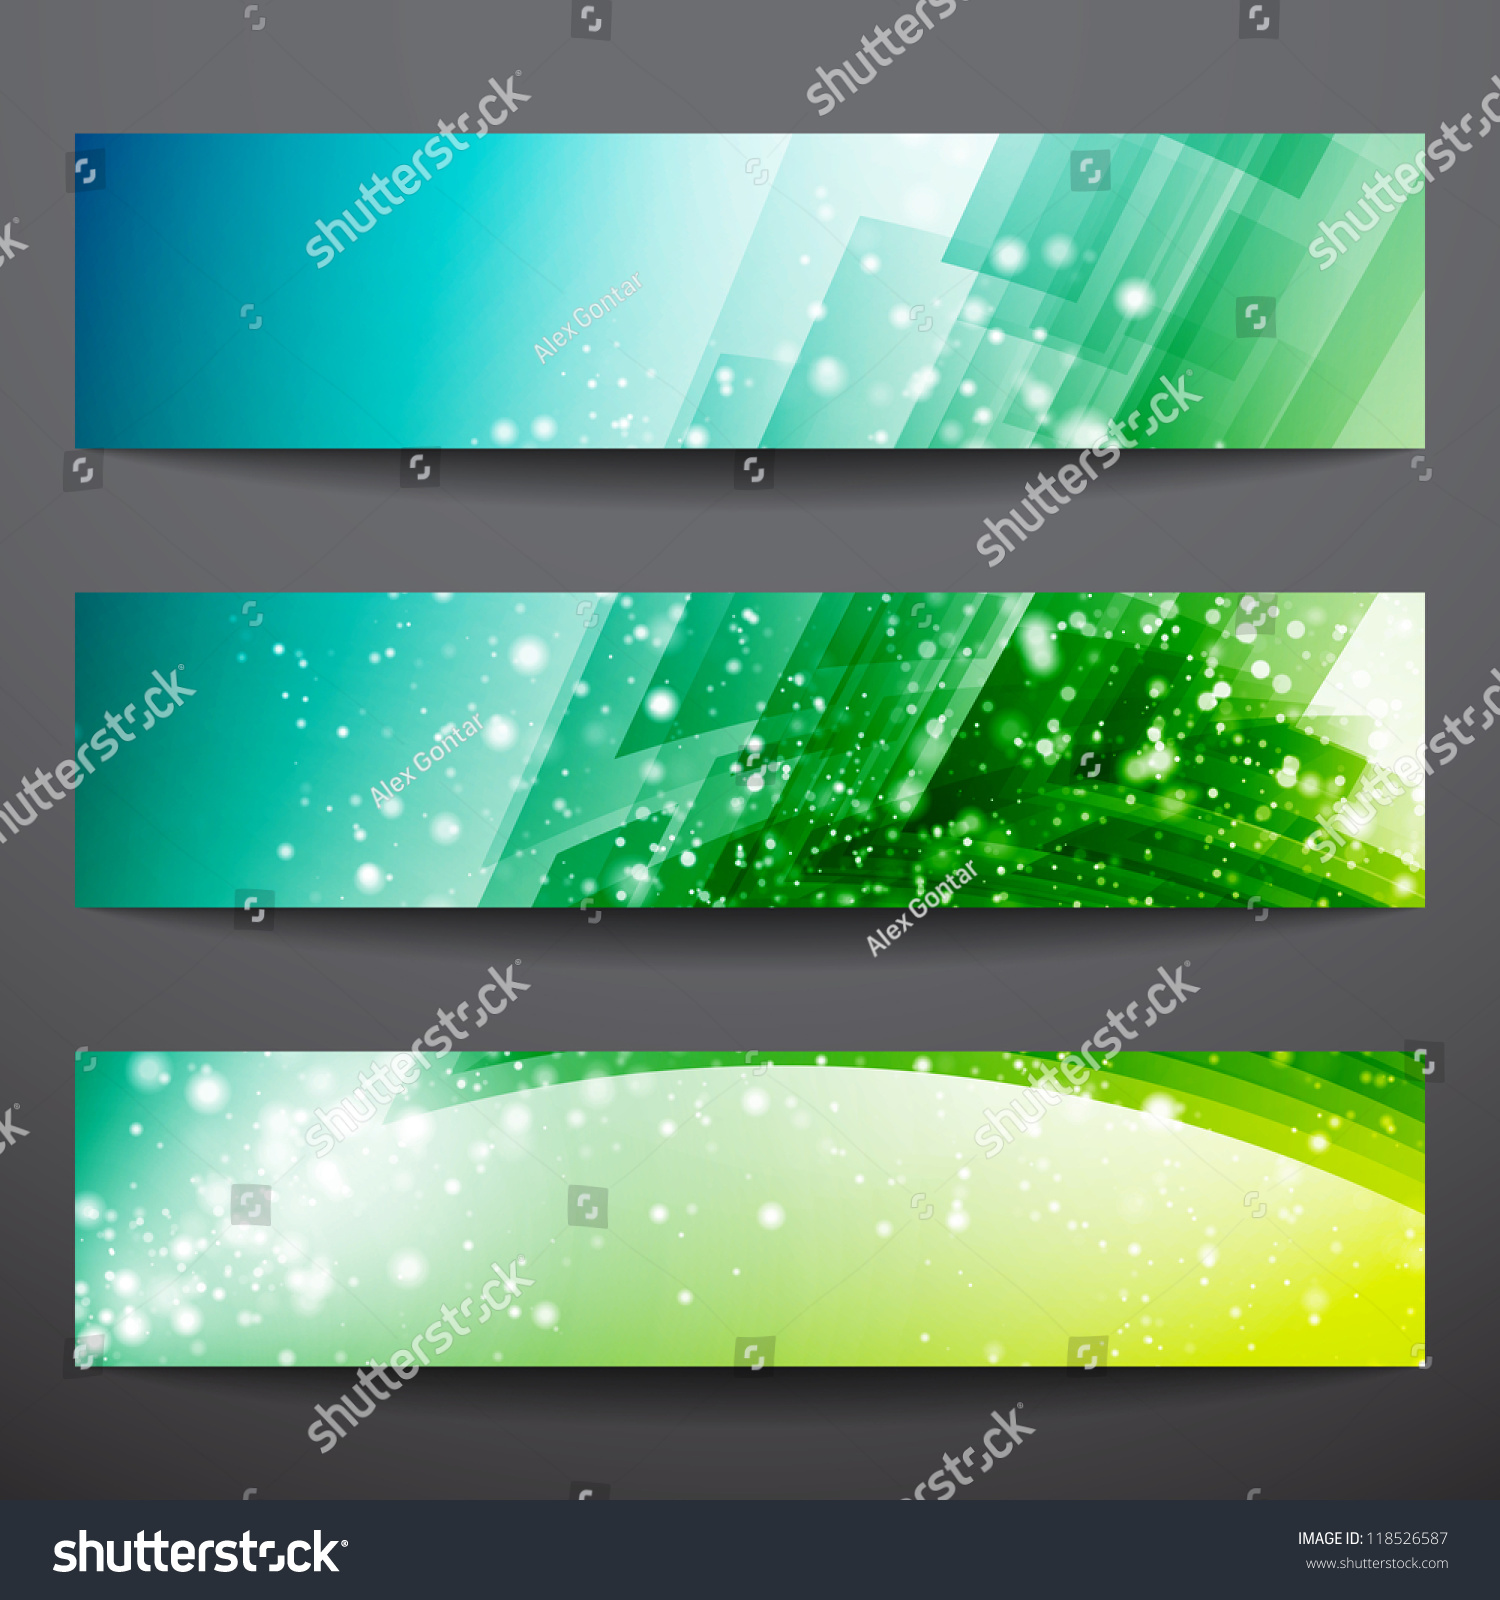 Abstract Vector Banners Business Banner Banner Stock Vector (Royalty